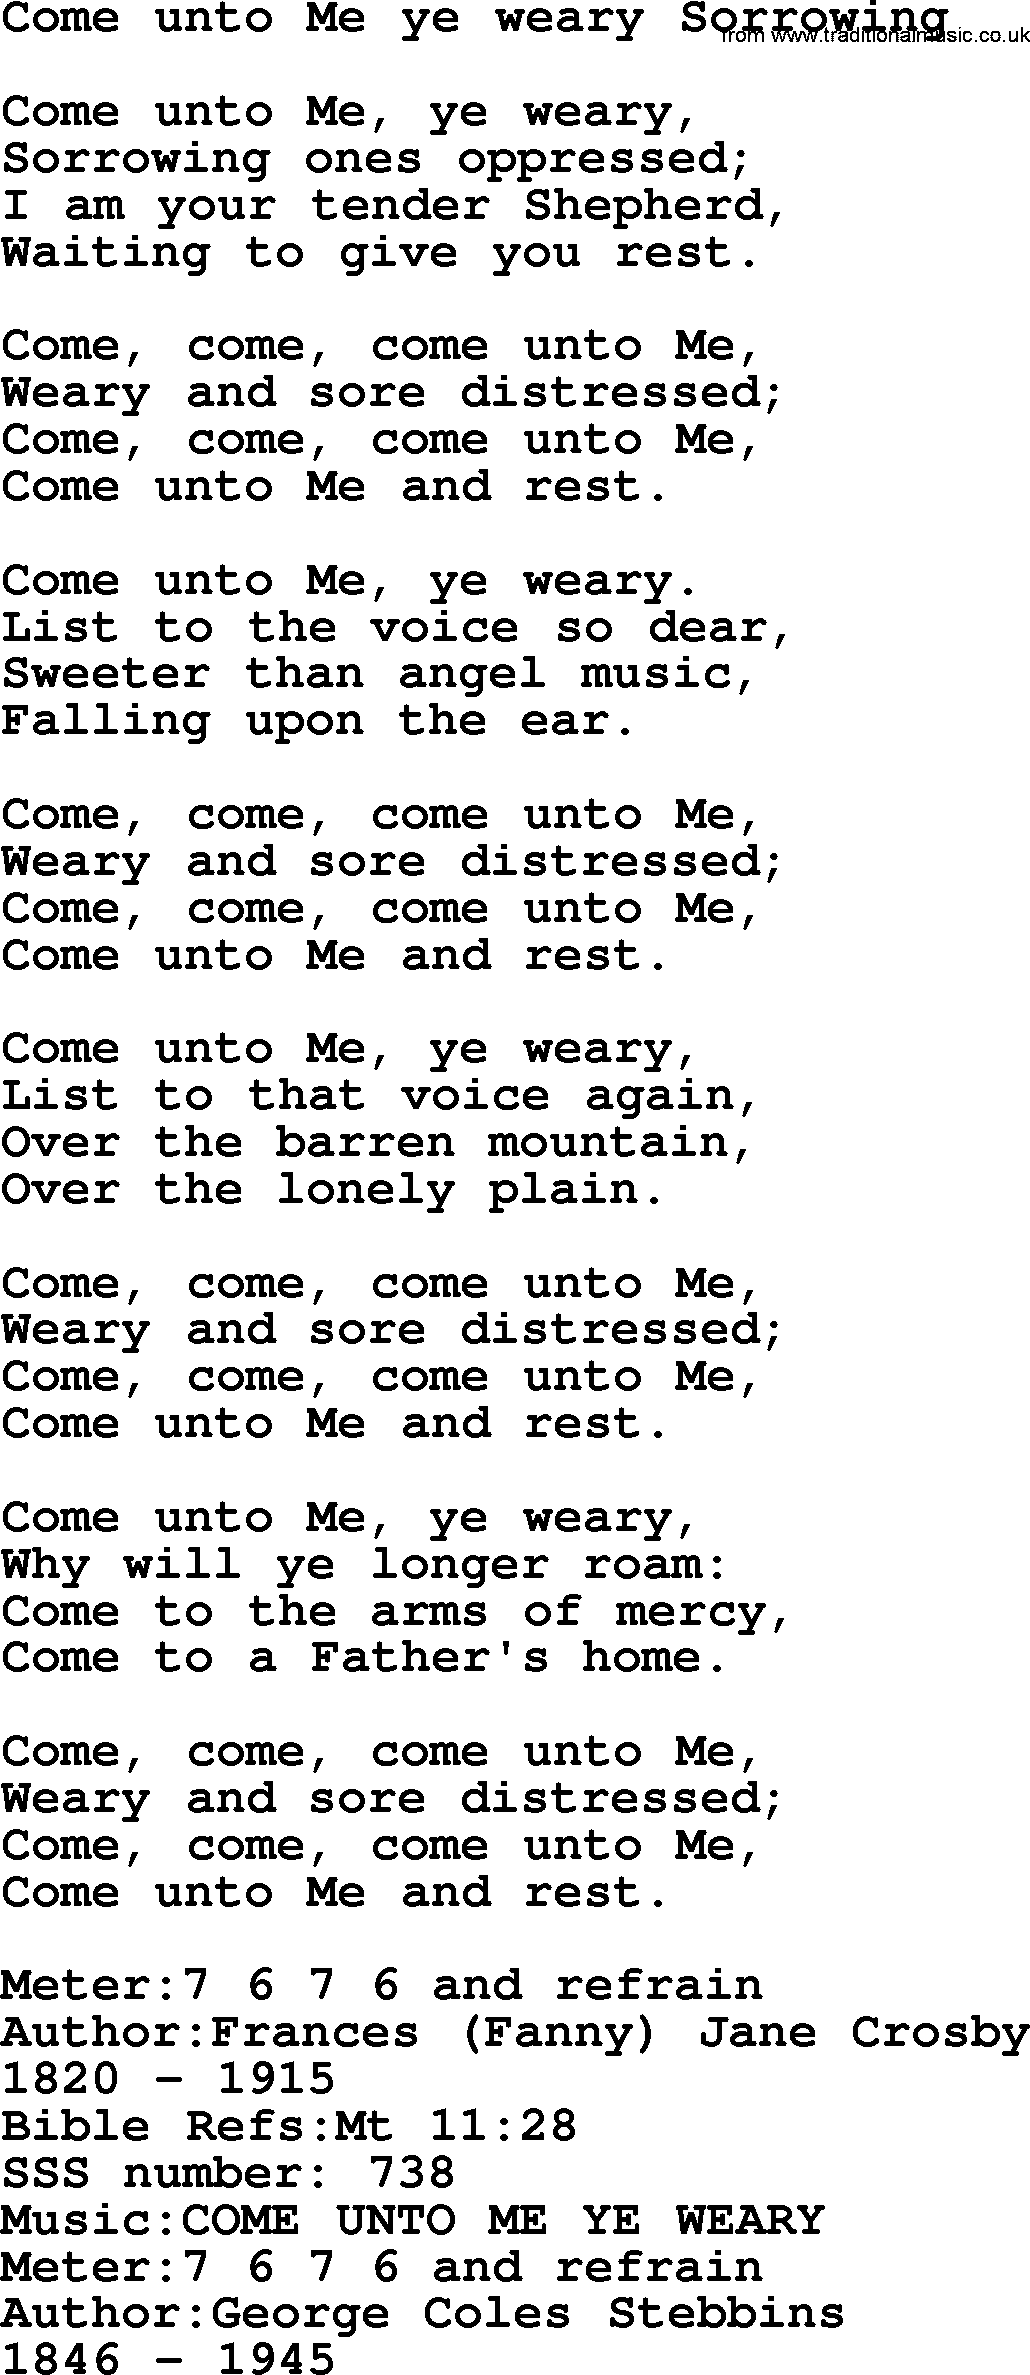 Sacred Songs and Solos complete, 1200 Hymns, title: Come Unto Me Ye Weary Sorrowing, lyrics and PDF